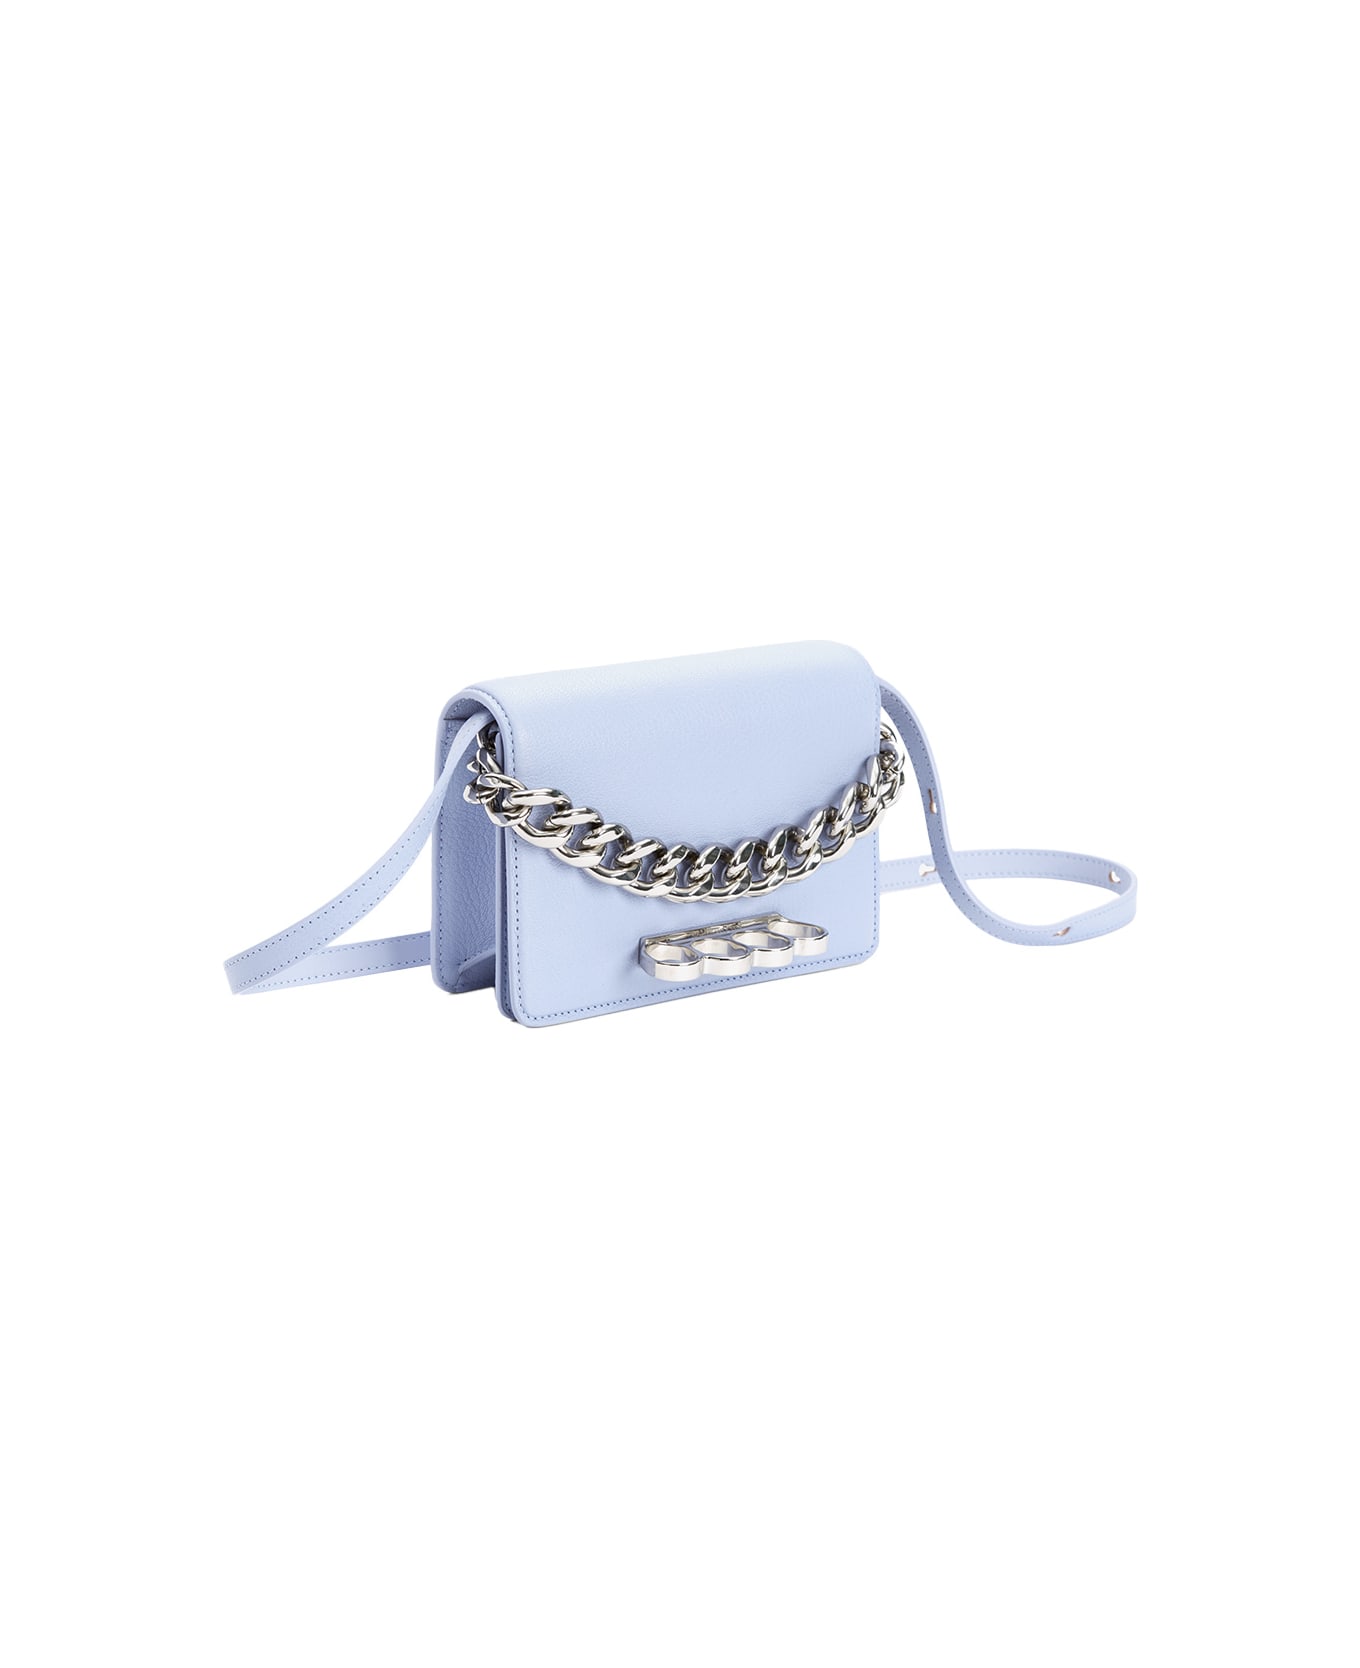 Alexander McQueen Lilac The Four Ring Mini Bag With Silver Chain - Viola